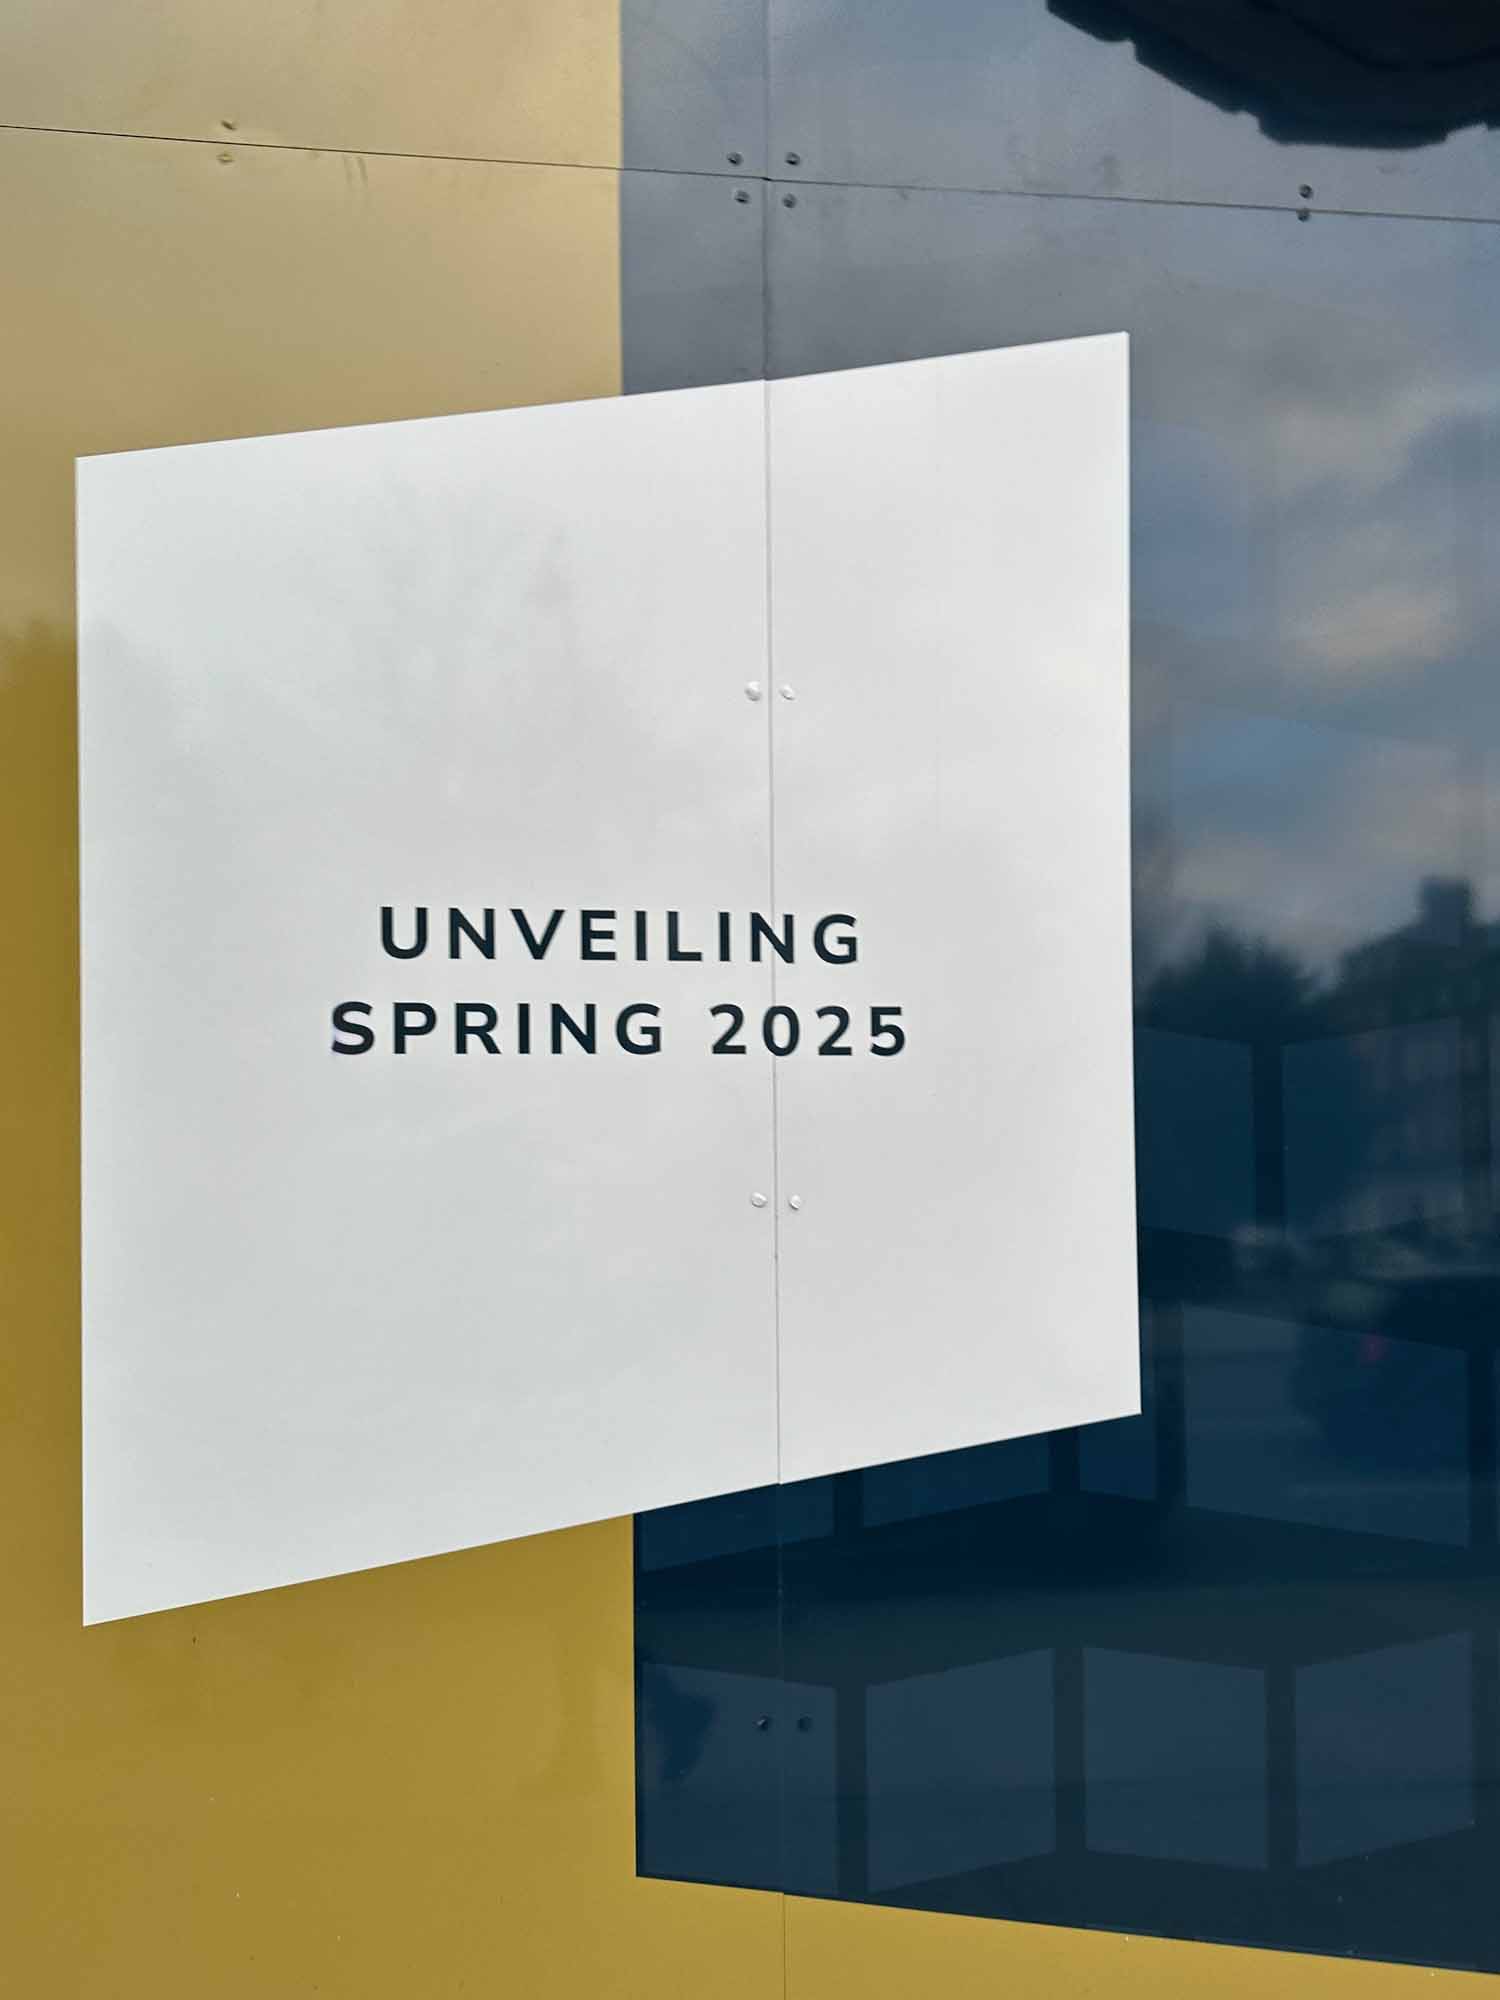 Refurbished hotel launching in Spring 2025